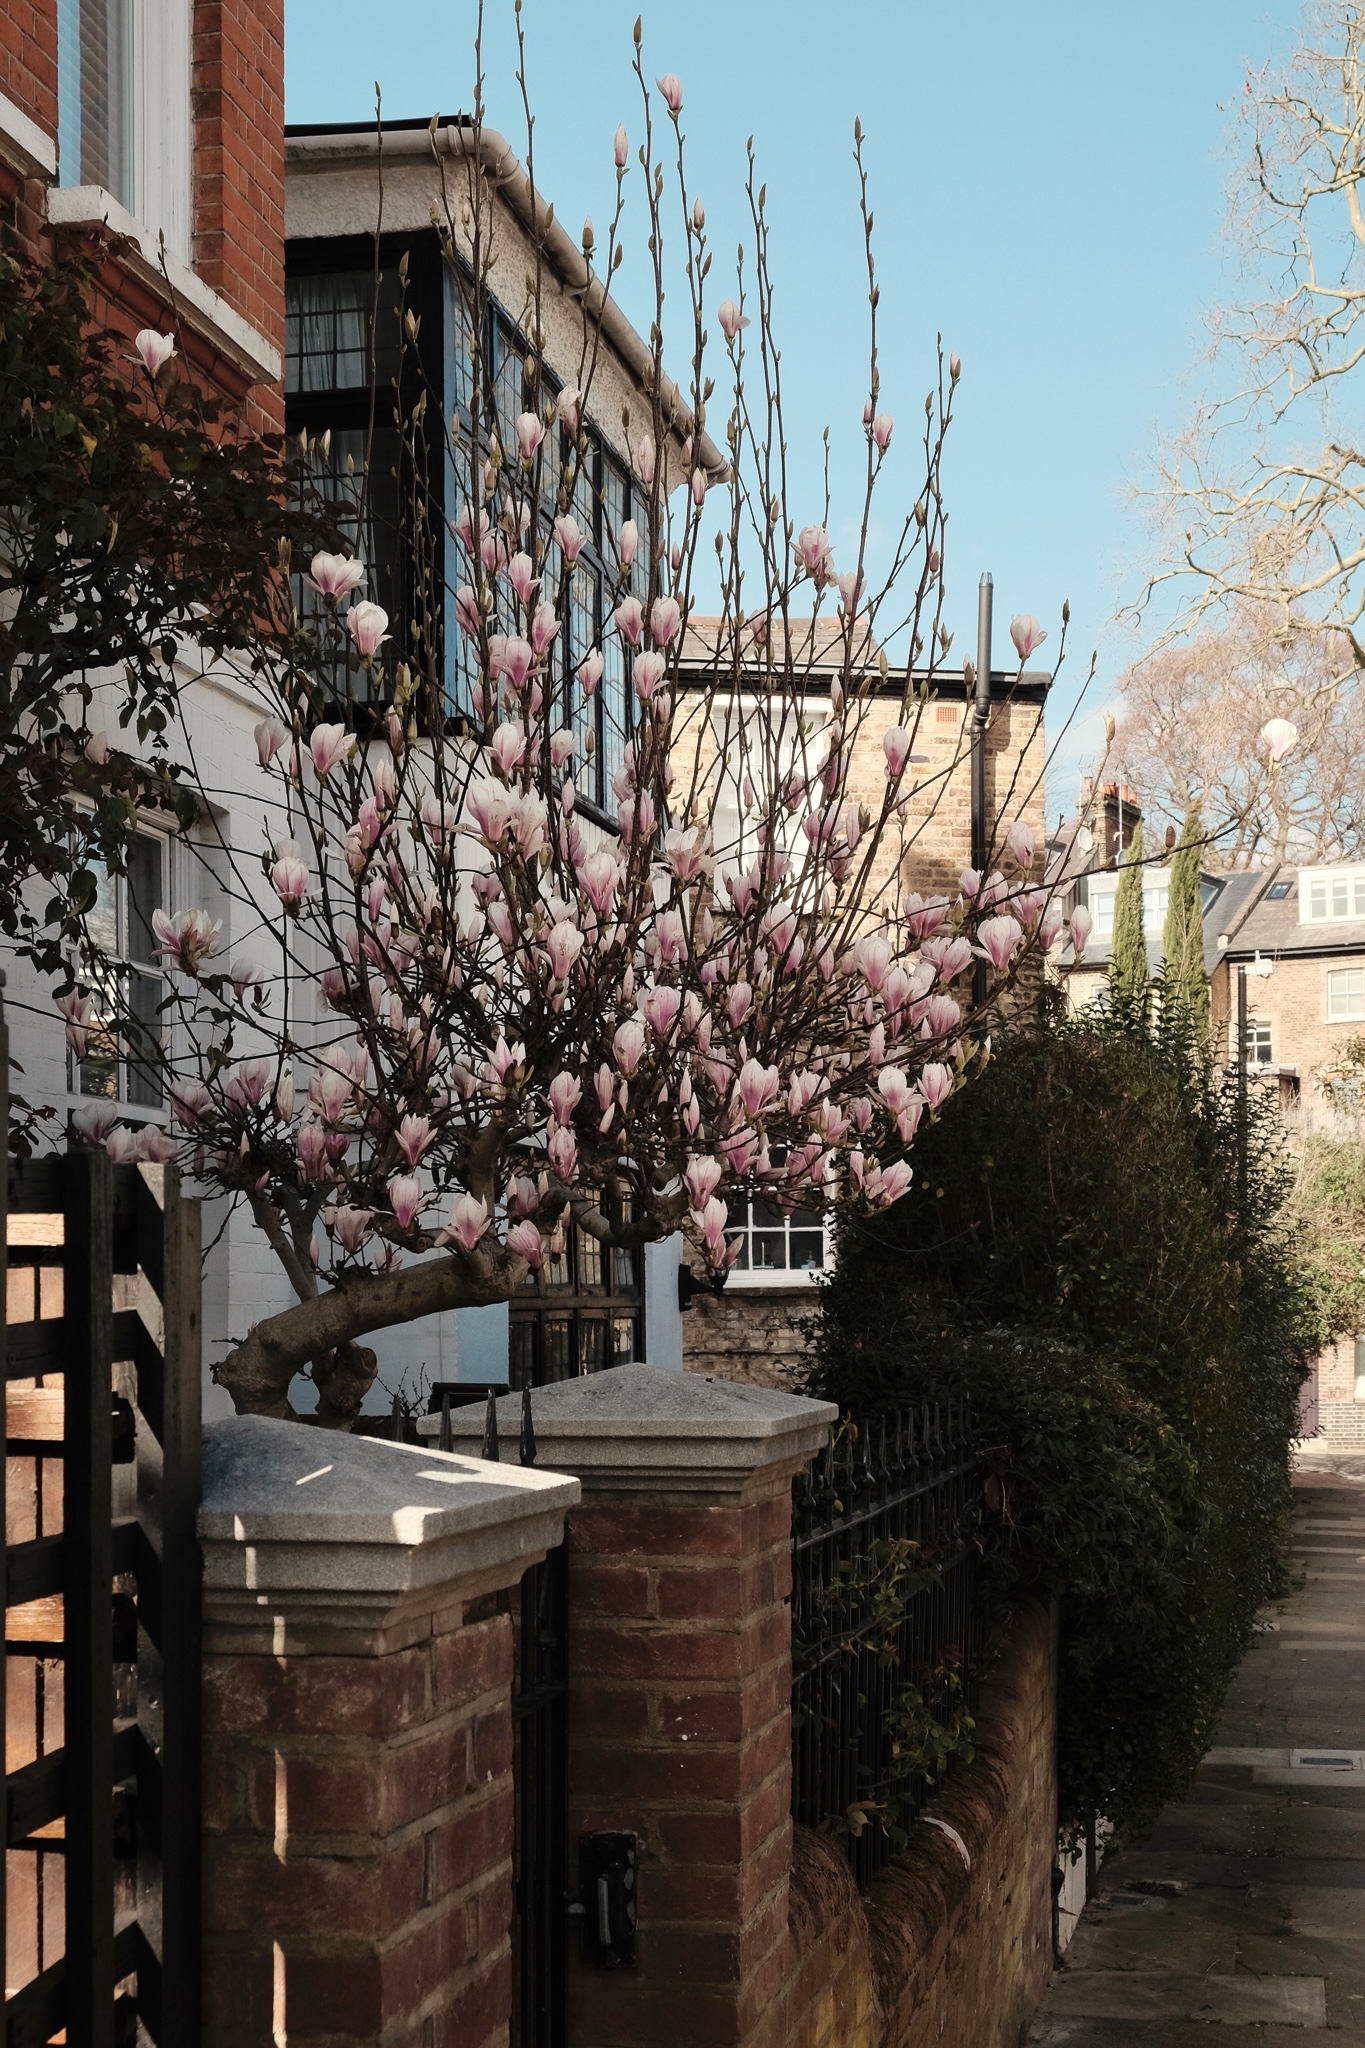 Magnolia tree in early bloom along a residential street in Hampstead